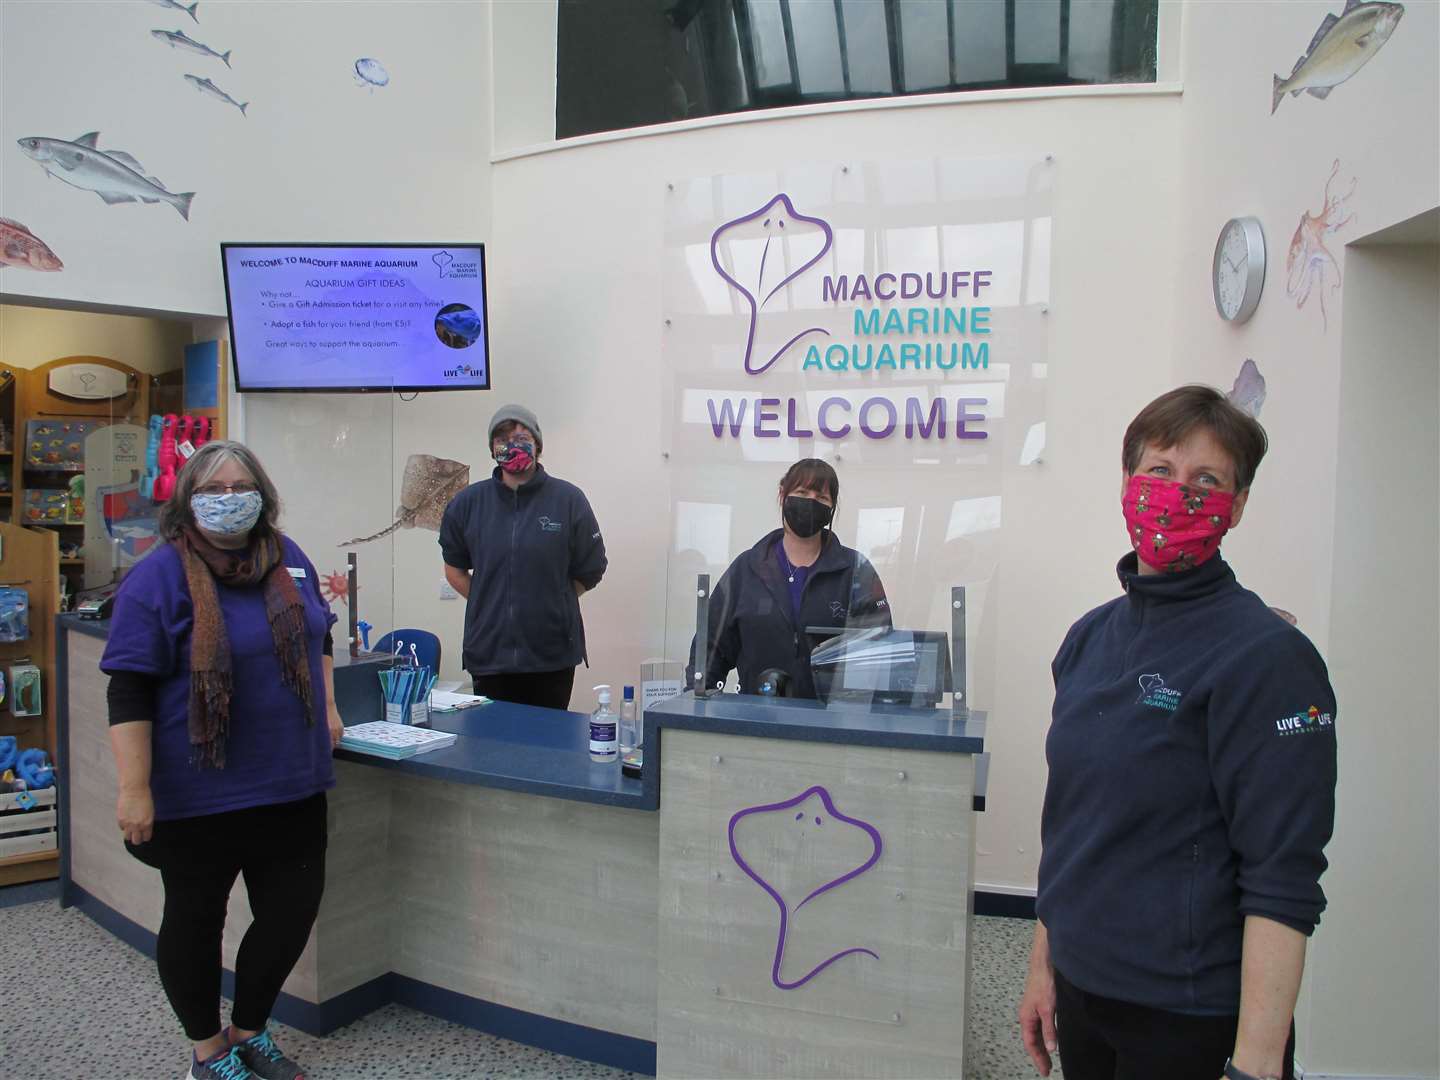 New measures are in place at Macduff Marine Aquarium including the wearing of face masks. Staff welcomed back visitors on Tuesday.